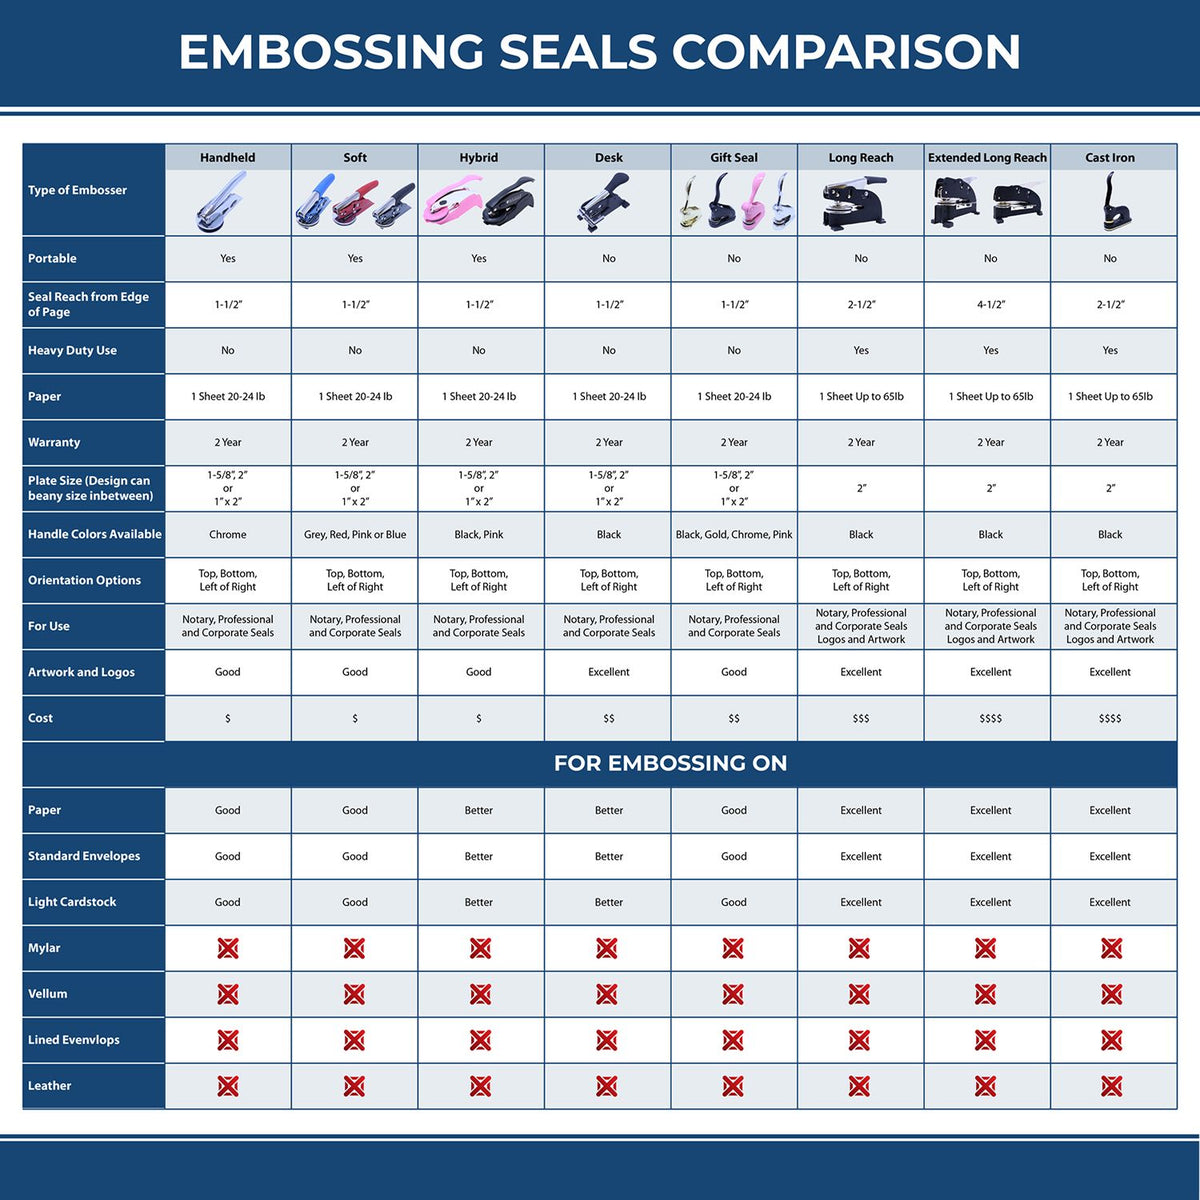 A comparison chart for the different types of mount models available for the Handheld Wyoming Professional Geologist Embosser